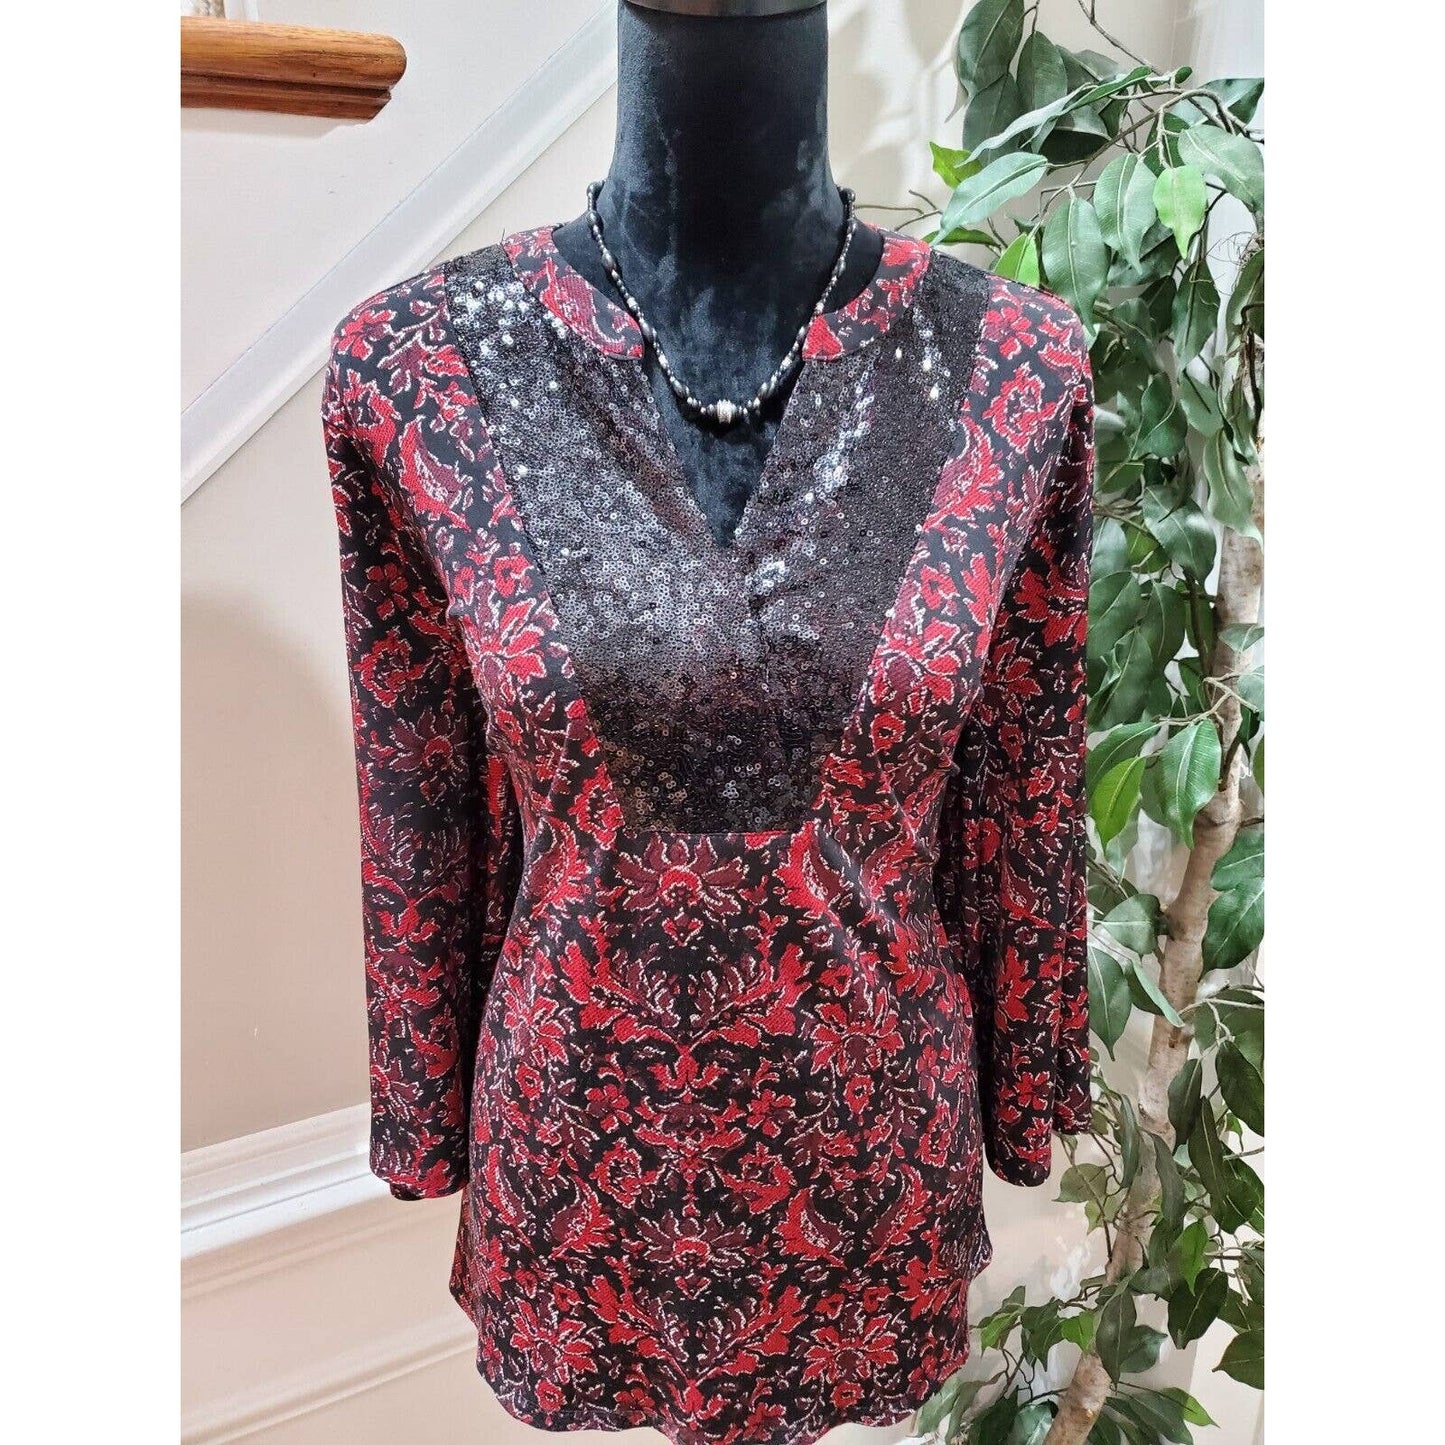 Cato Women's Black & Red Polyester V-Neck Long Sleeve Casual Shirt Size Large